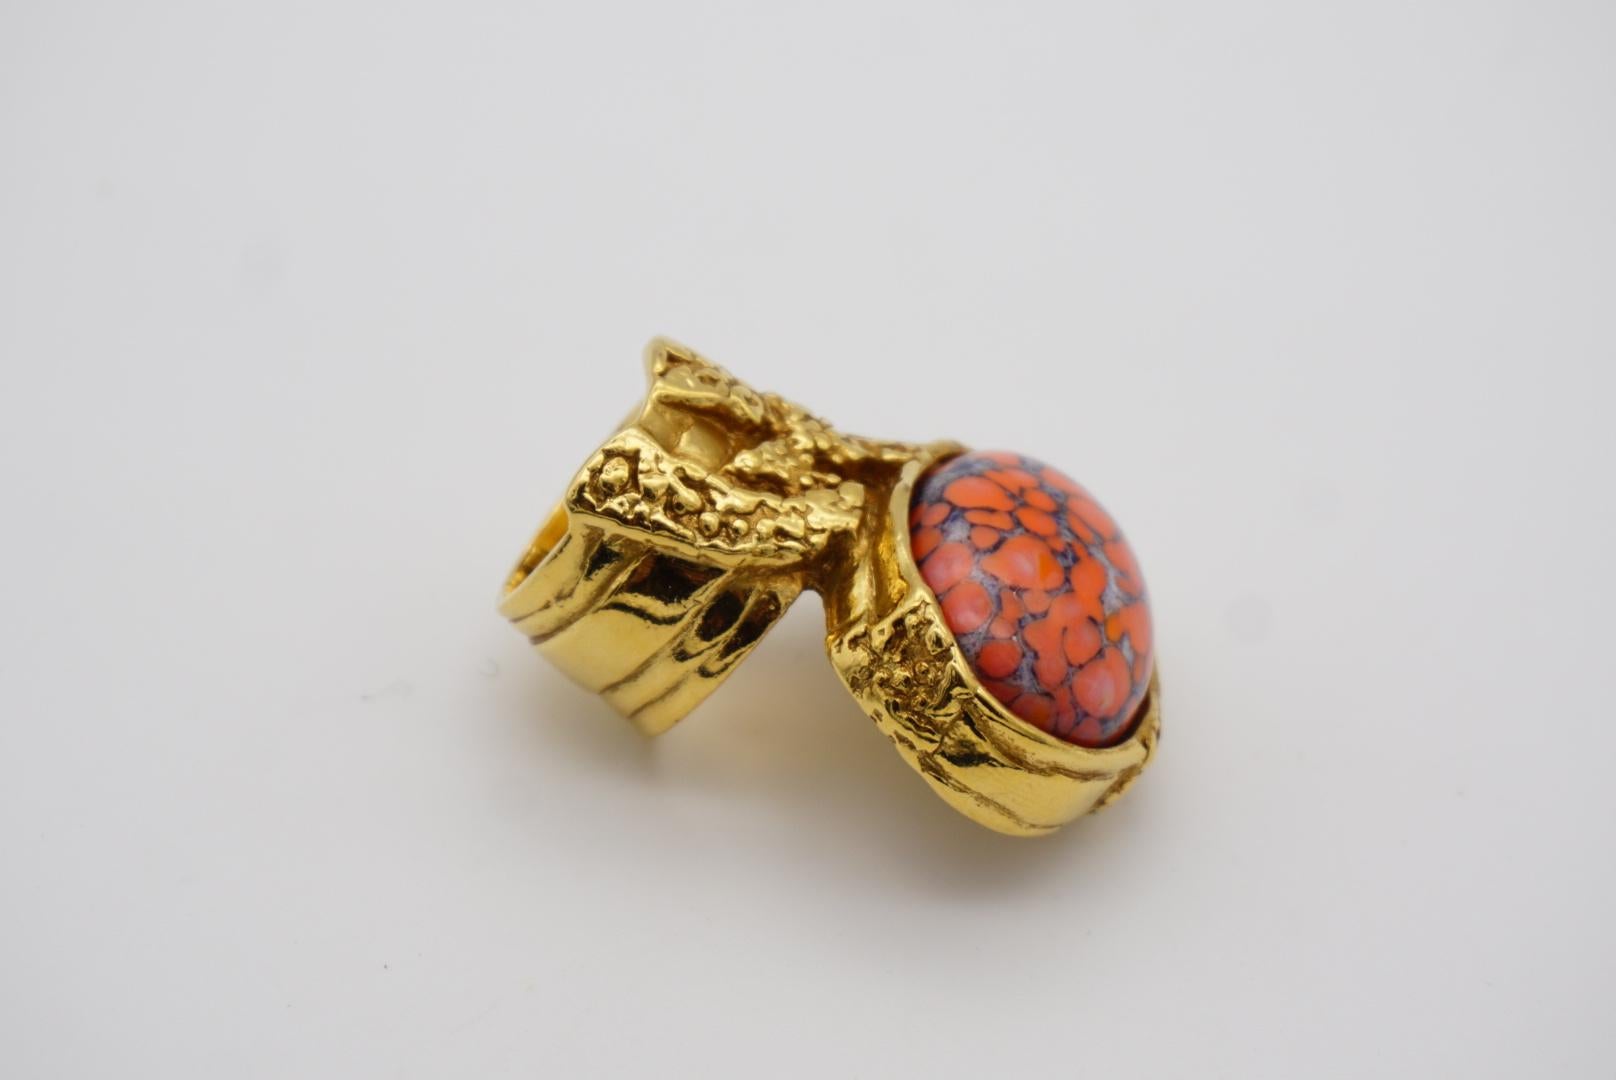 Yves Saint Laurent YSL Arty Orange Coral Cabochon Statement Enamel Ring, Size 4 In Excellent Condition For Sale In Wokingham, England